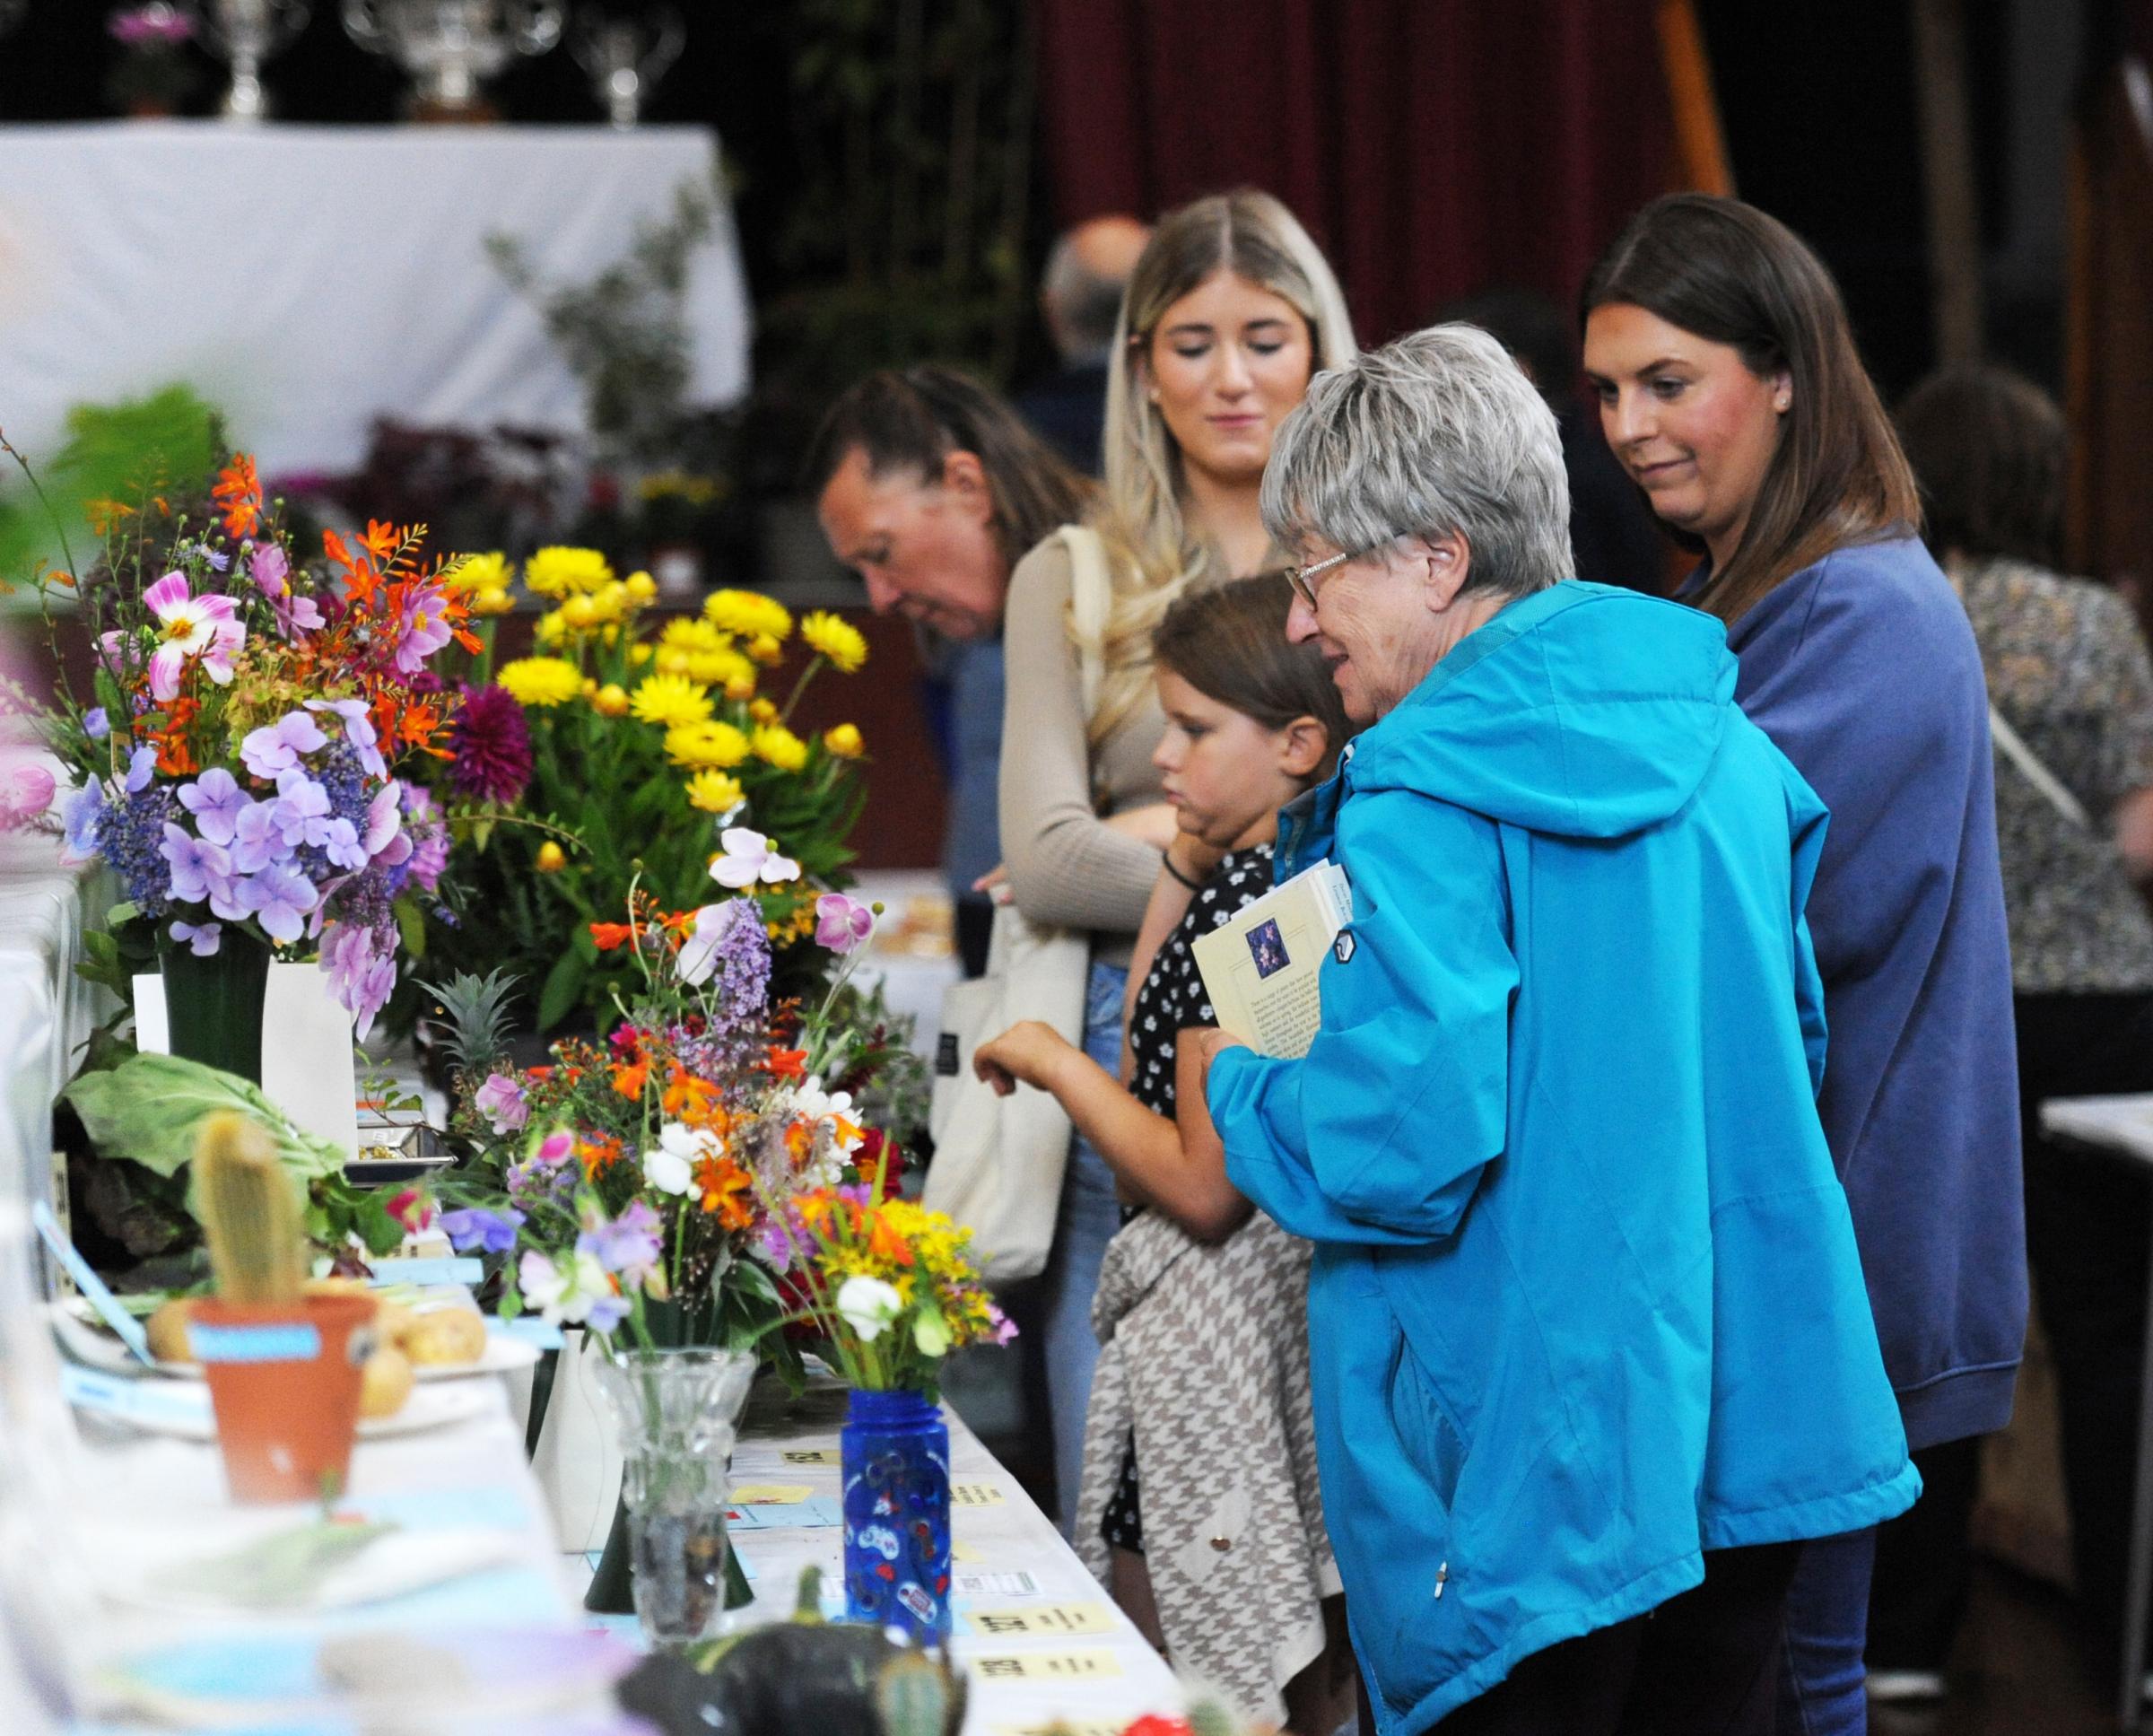 The West Kilbride Horticultural Societys annual show attracted a dazzling array of entries - and a big crowd of visitors (Photo: Charlie Gilmour)